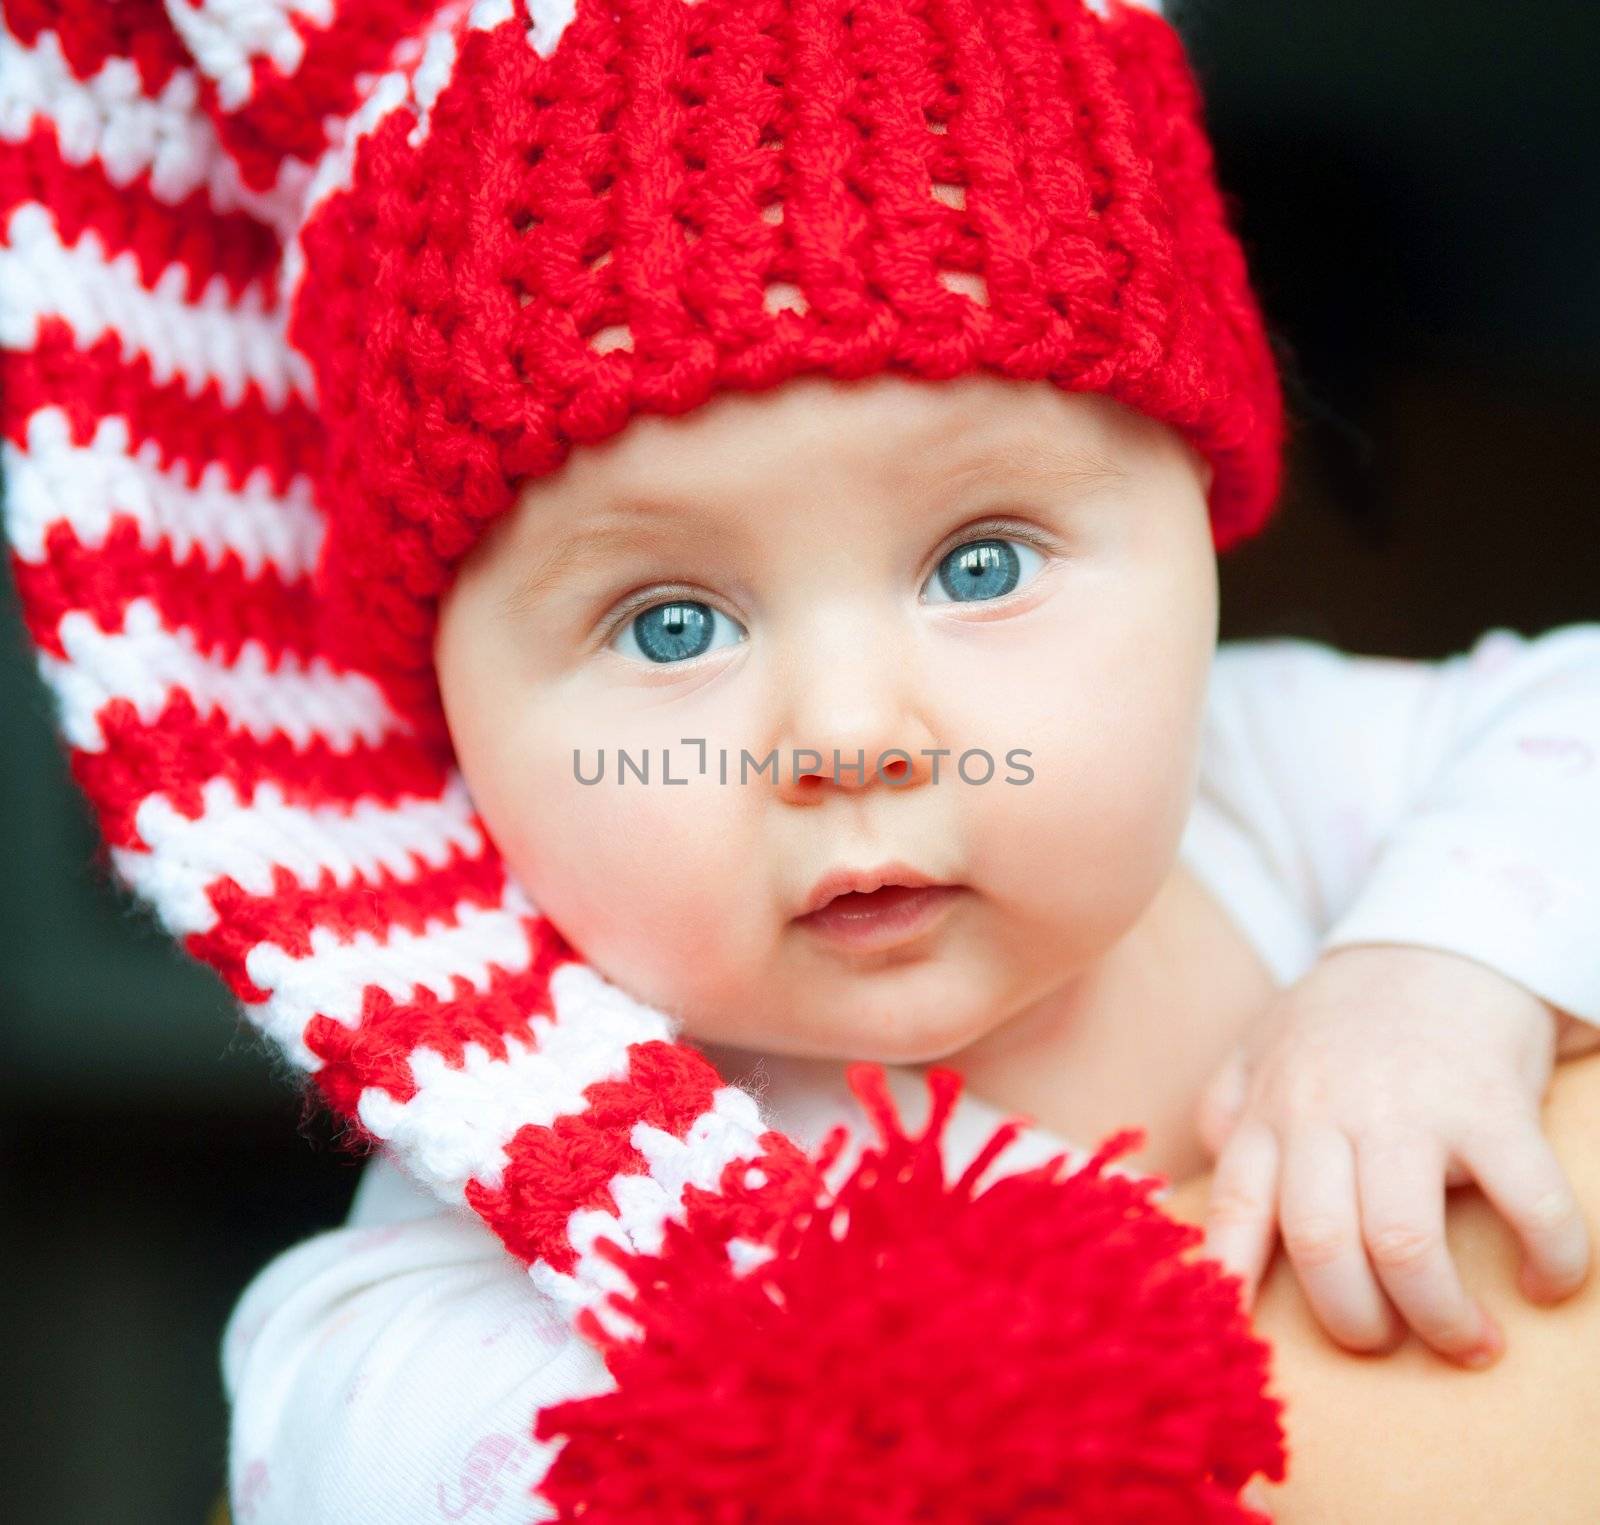 pretty infant in red hat